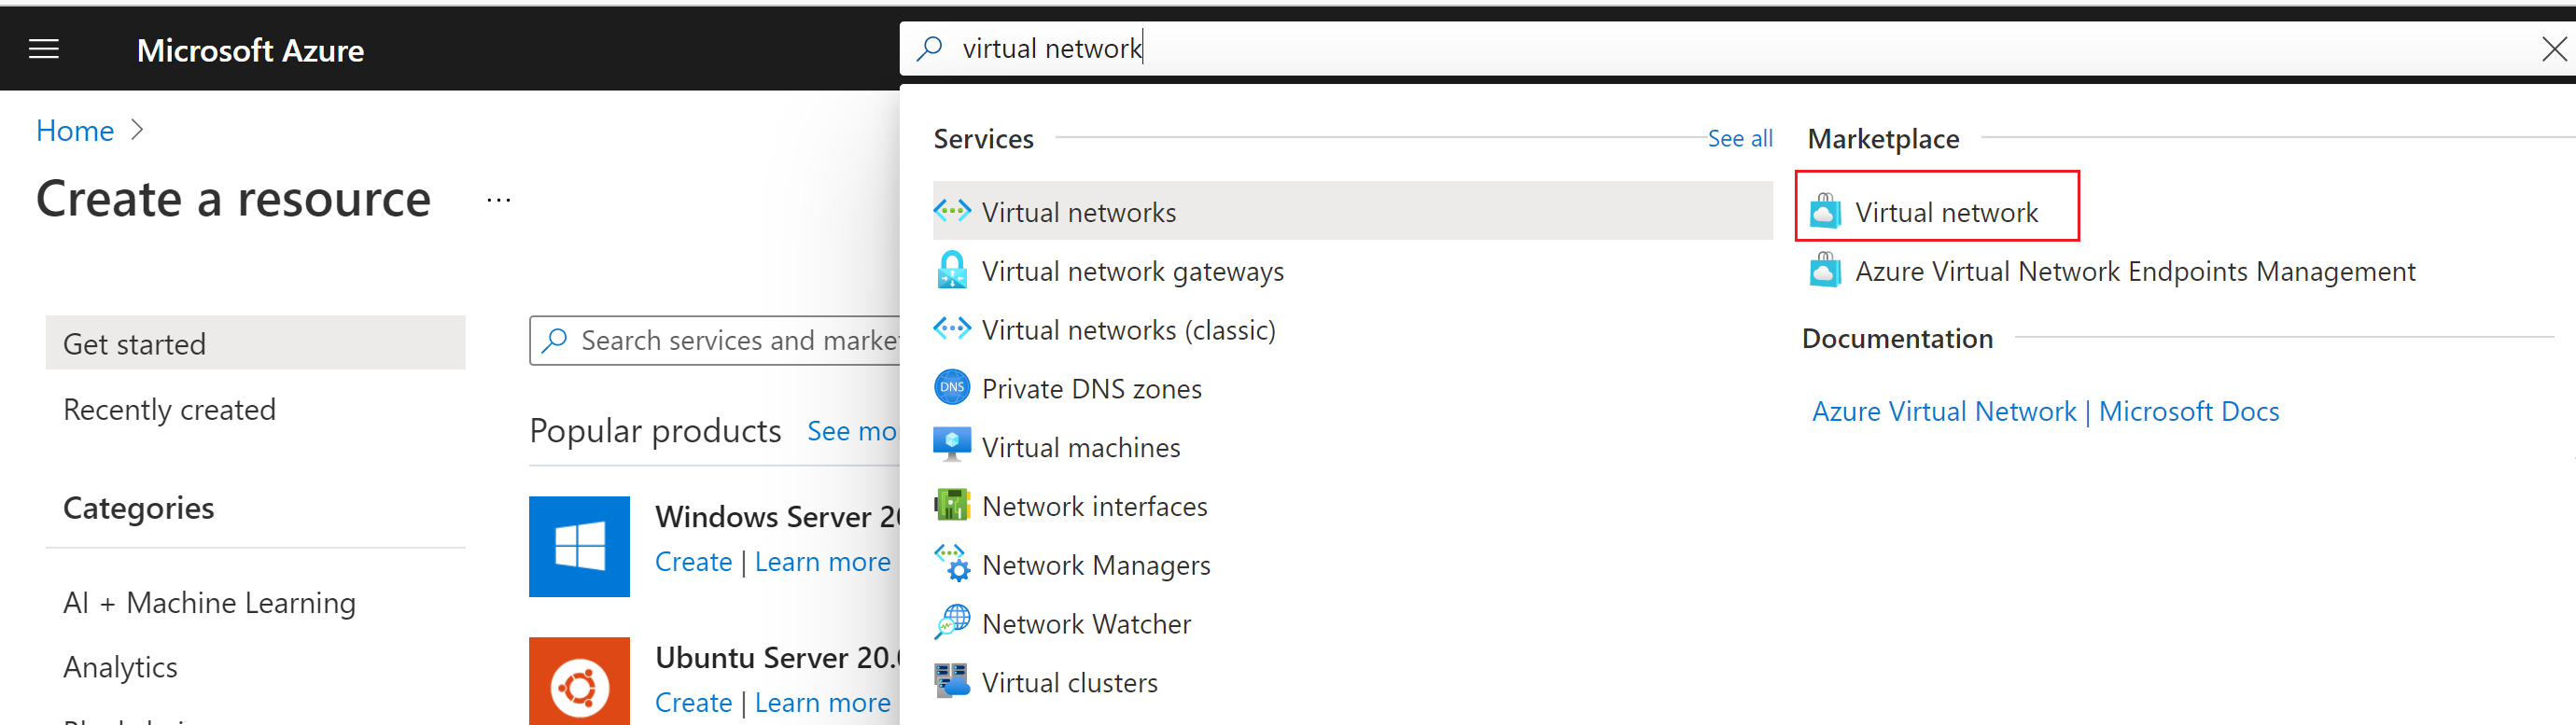 Screenshot shows the Azure portal Search bar results and selecting Virtual Network from Marketplace.